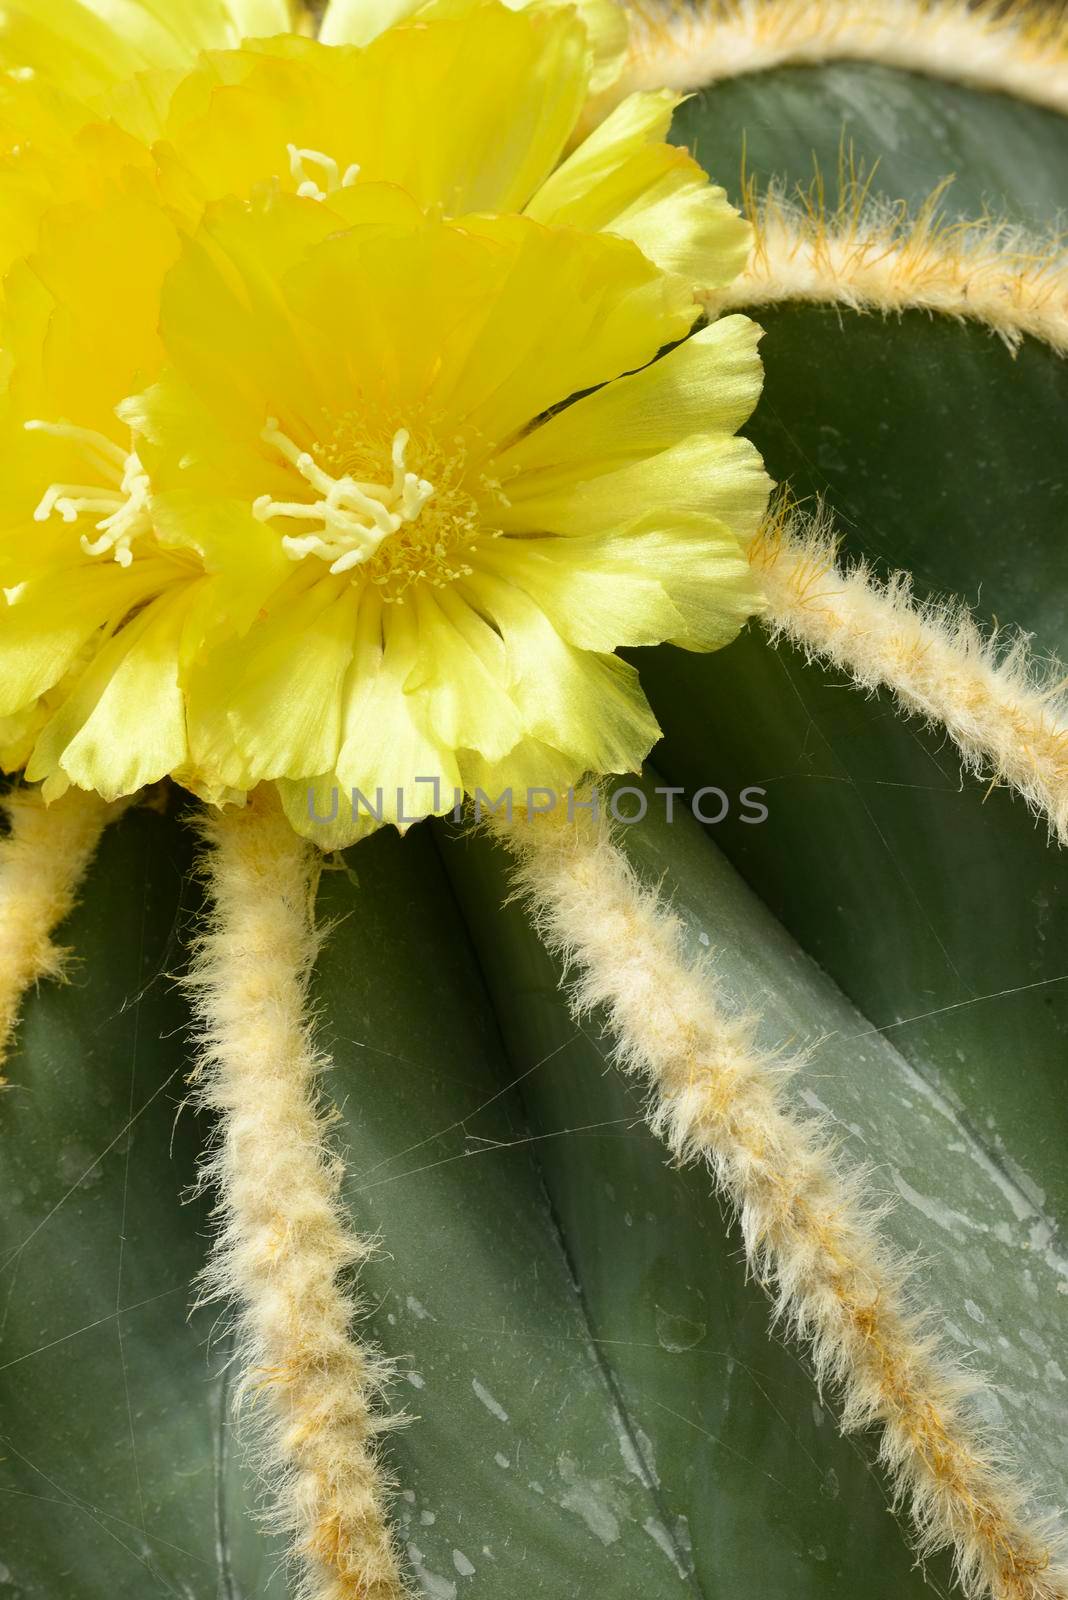 Yellow flowers of succulent plant Parodia magnifica by AlessandroZocc